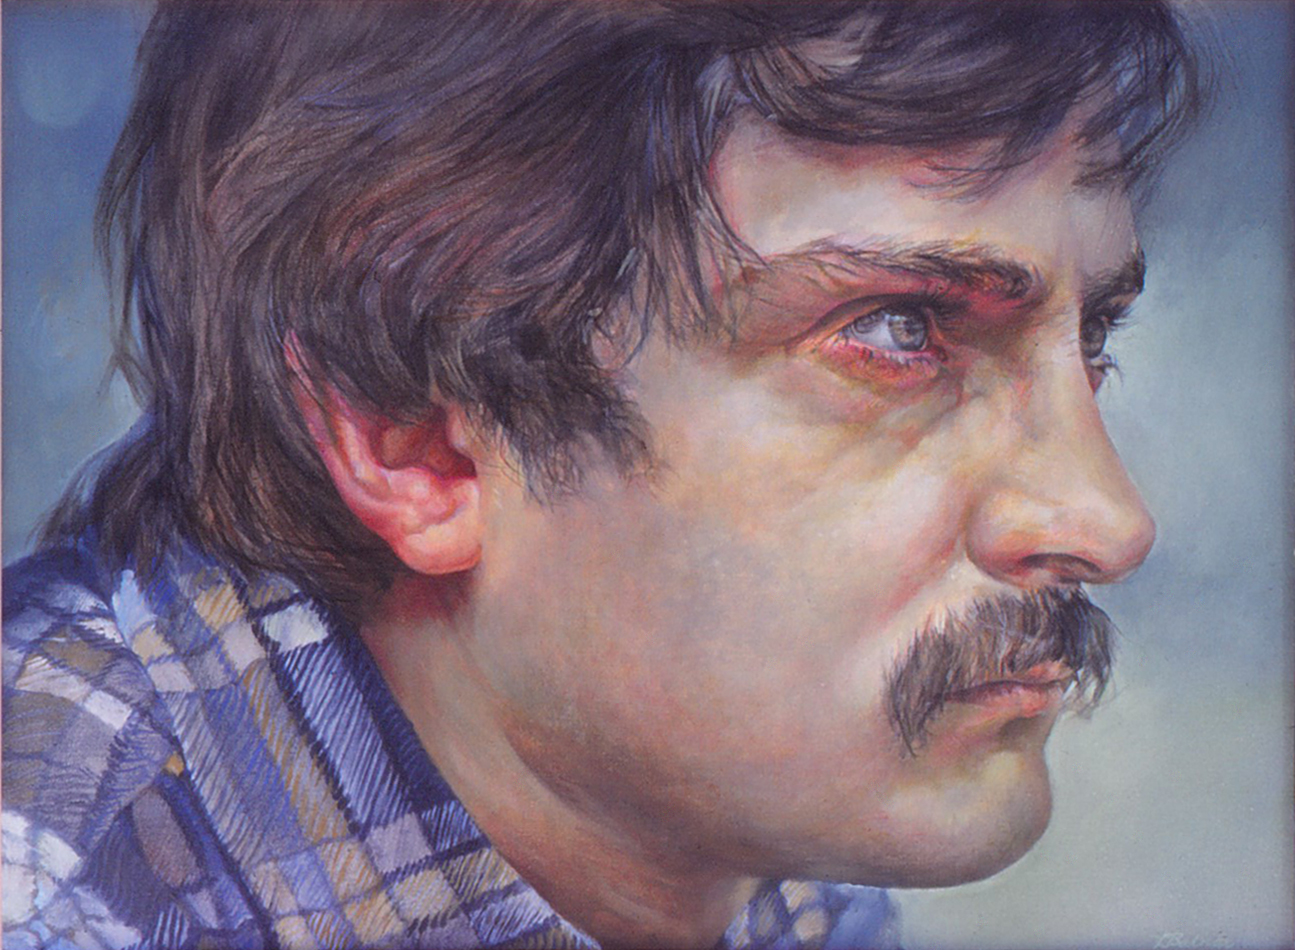 5dn - Study of M. Without Glasses - oil on canvas, 21x28 in., 1982.jpg